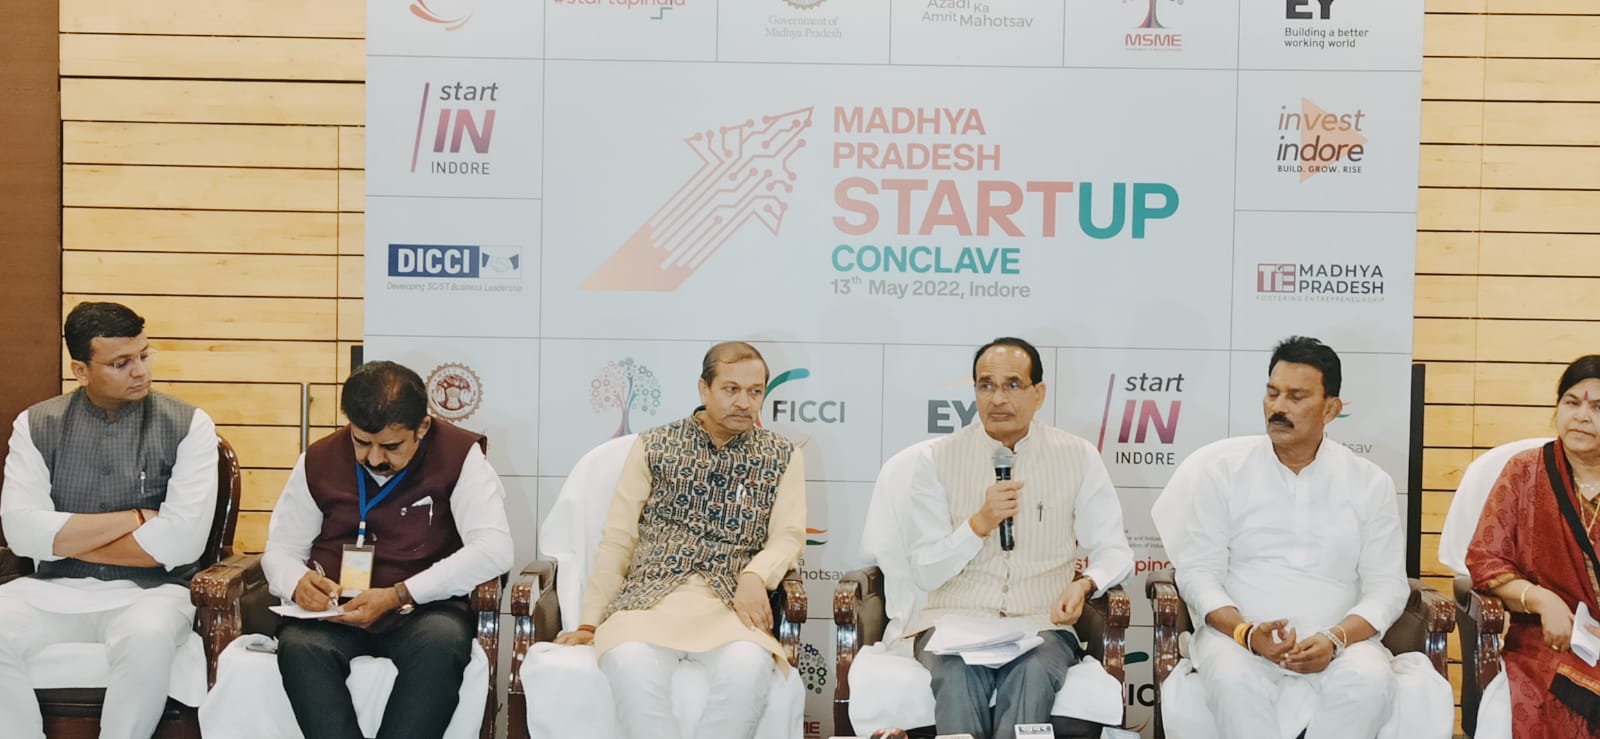 Indore, indore news, Startup, Startup Conclave-2022 organized, Latest Hindi News Indore, indore startup update, What is Startup, Startup like this, Startup can be in three ways,